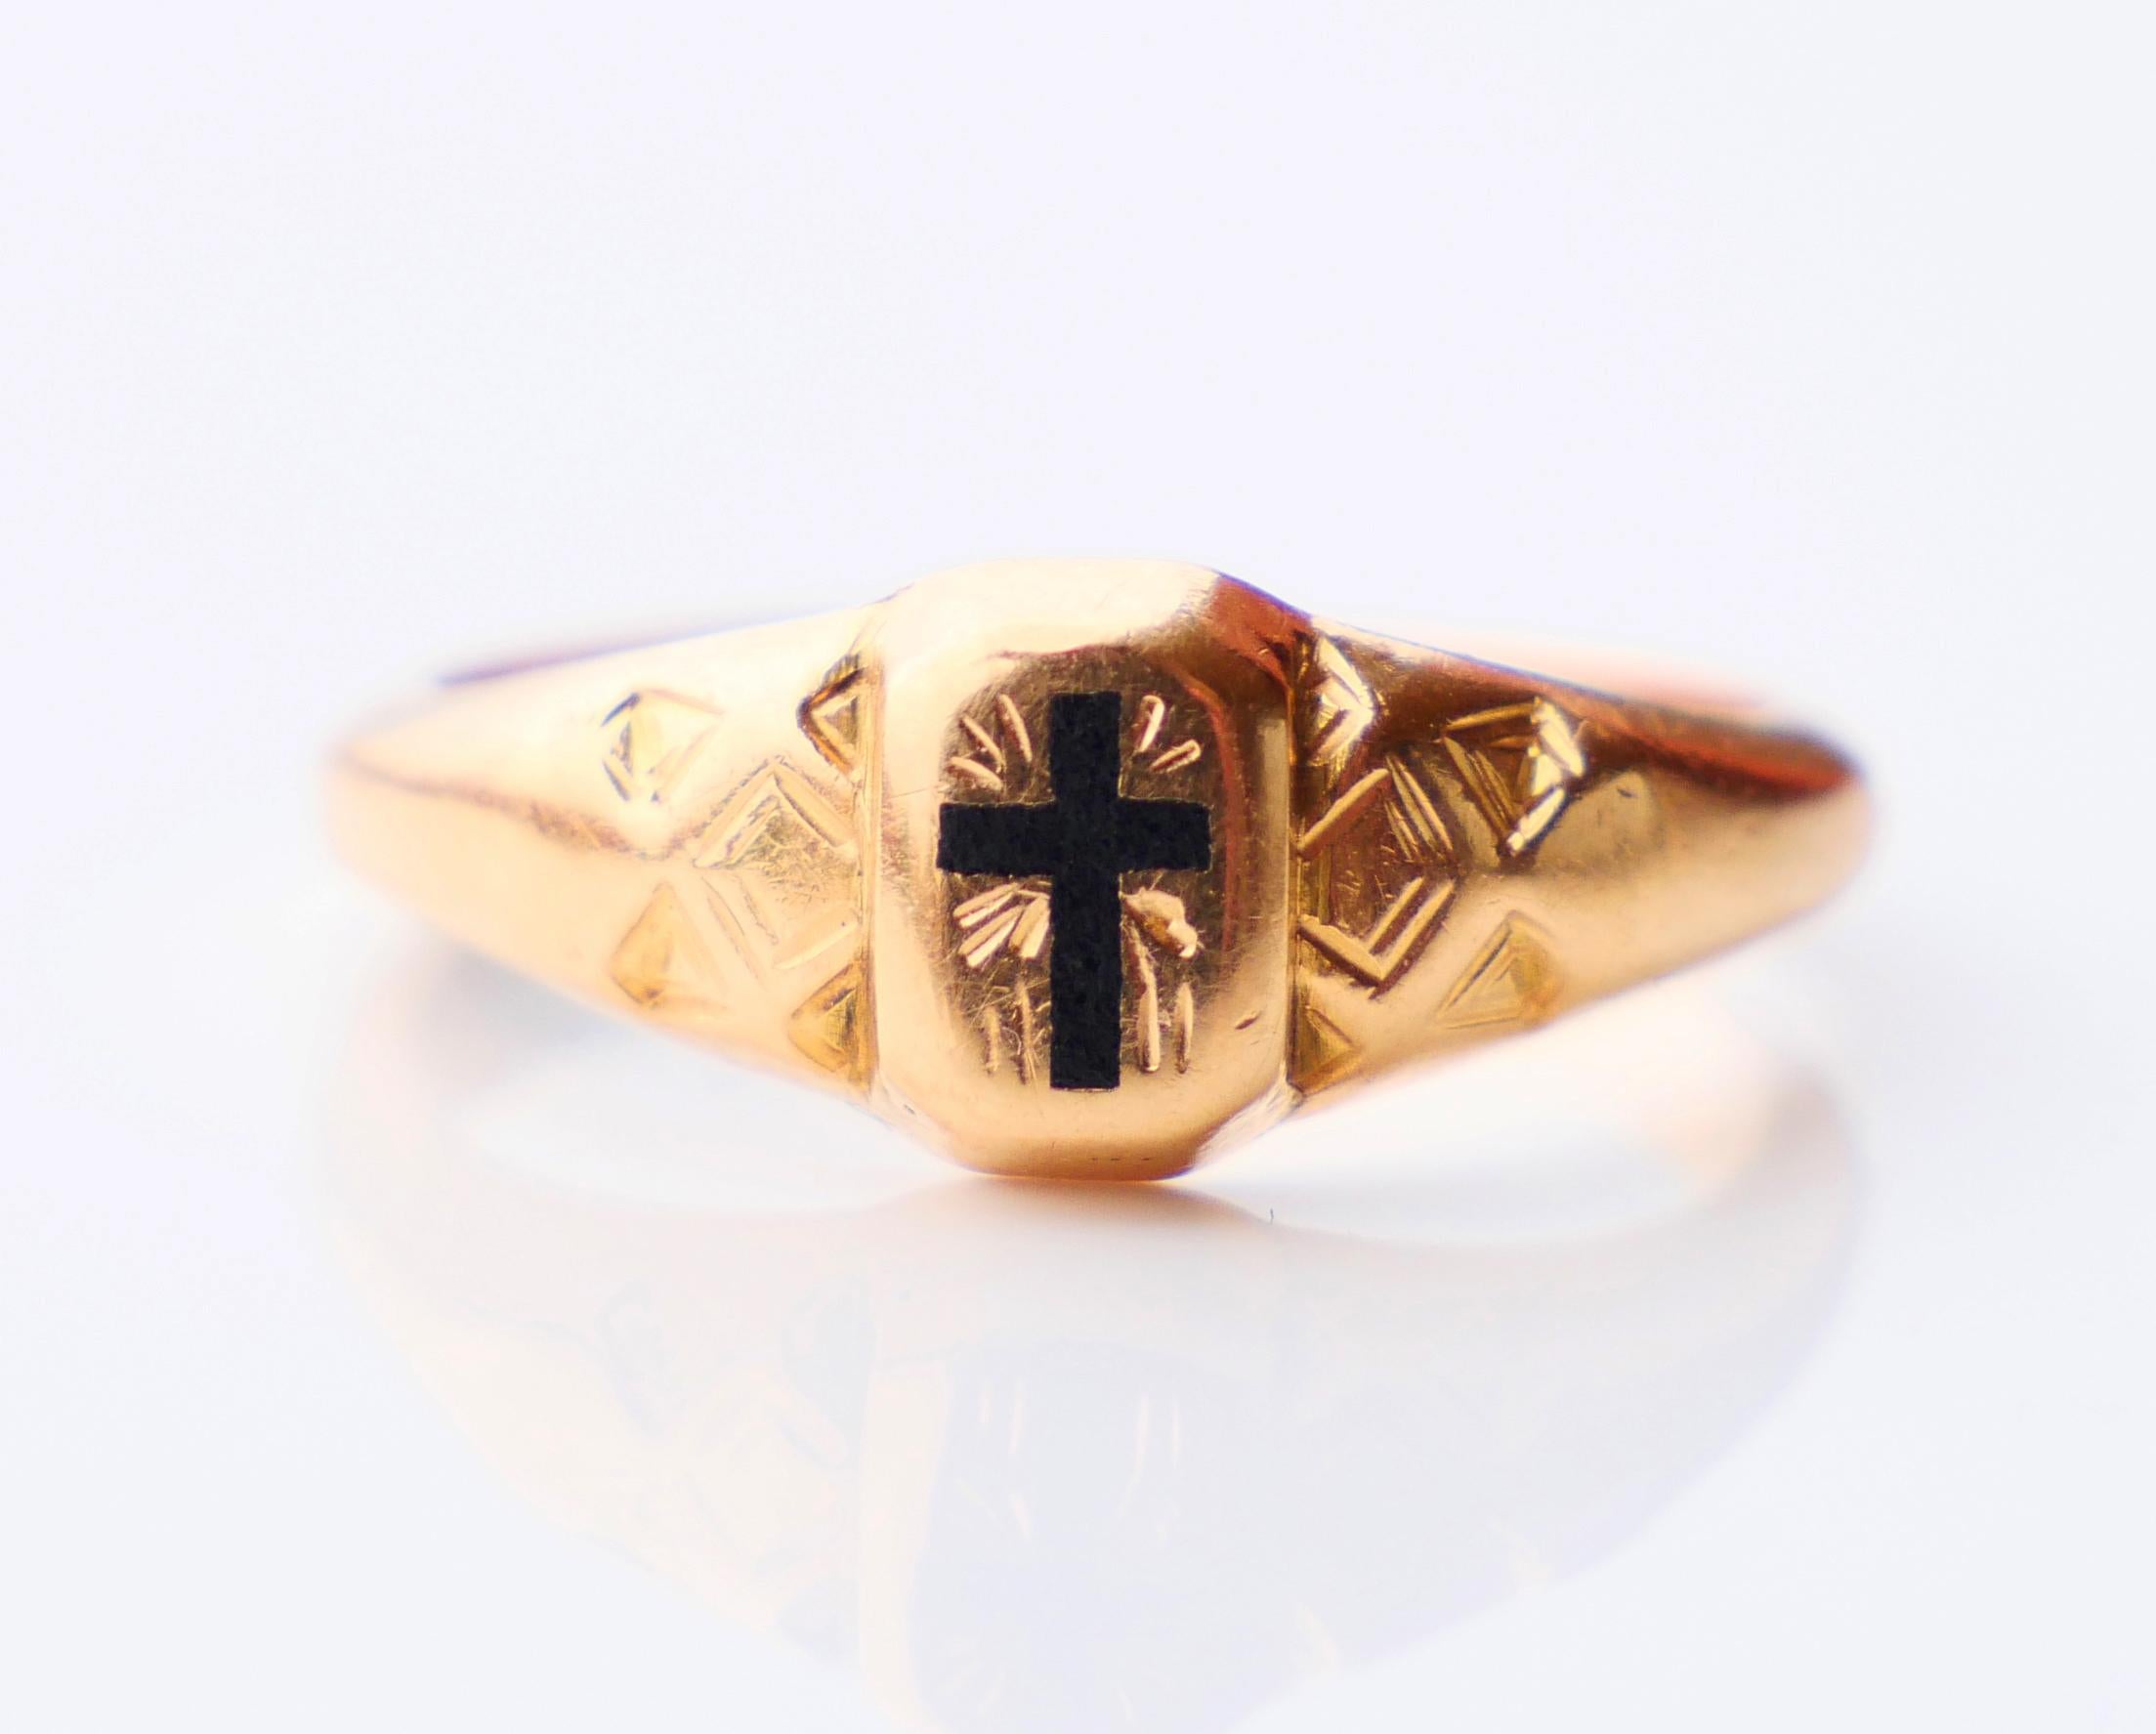 Ring in solid 18K Yellow Gold with hand - engraved shoulders and cross ornamentation filled with black Enamel on the face. Cross measures : 5mm x 3.3 mm . Crown measures 7.5 mm x 6mm x 2.6 mm deep.

Made for Men or Women.

Hand - made in Finland